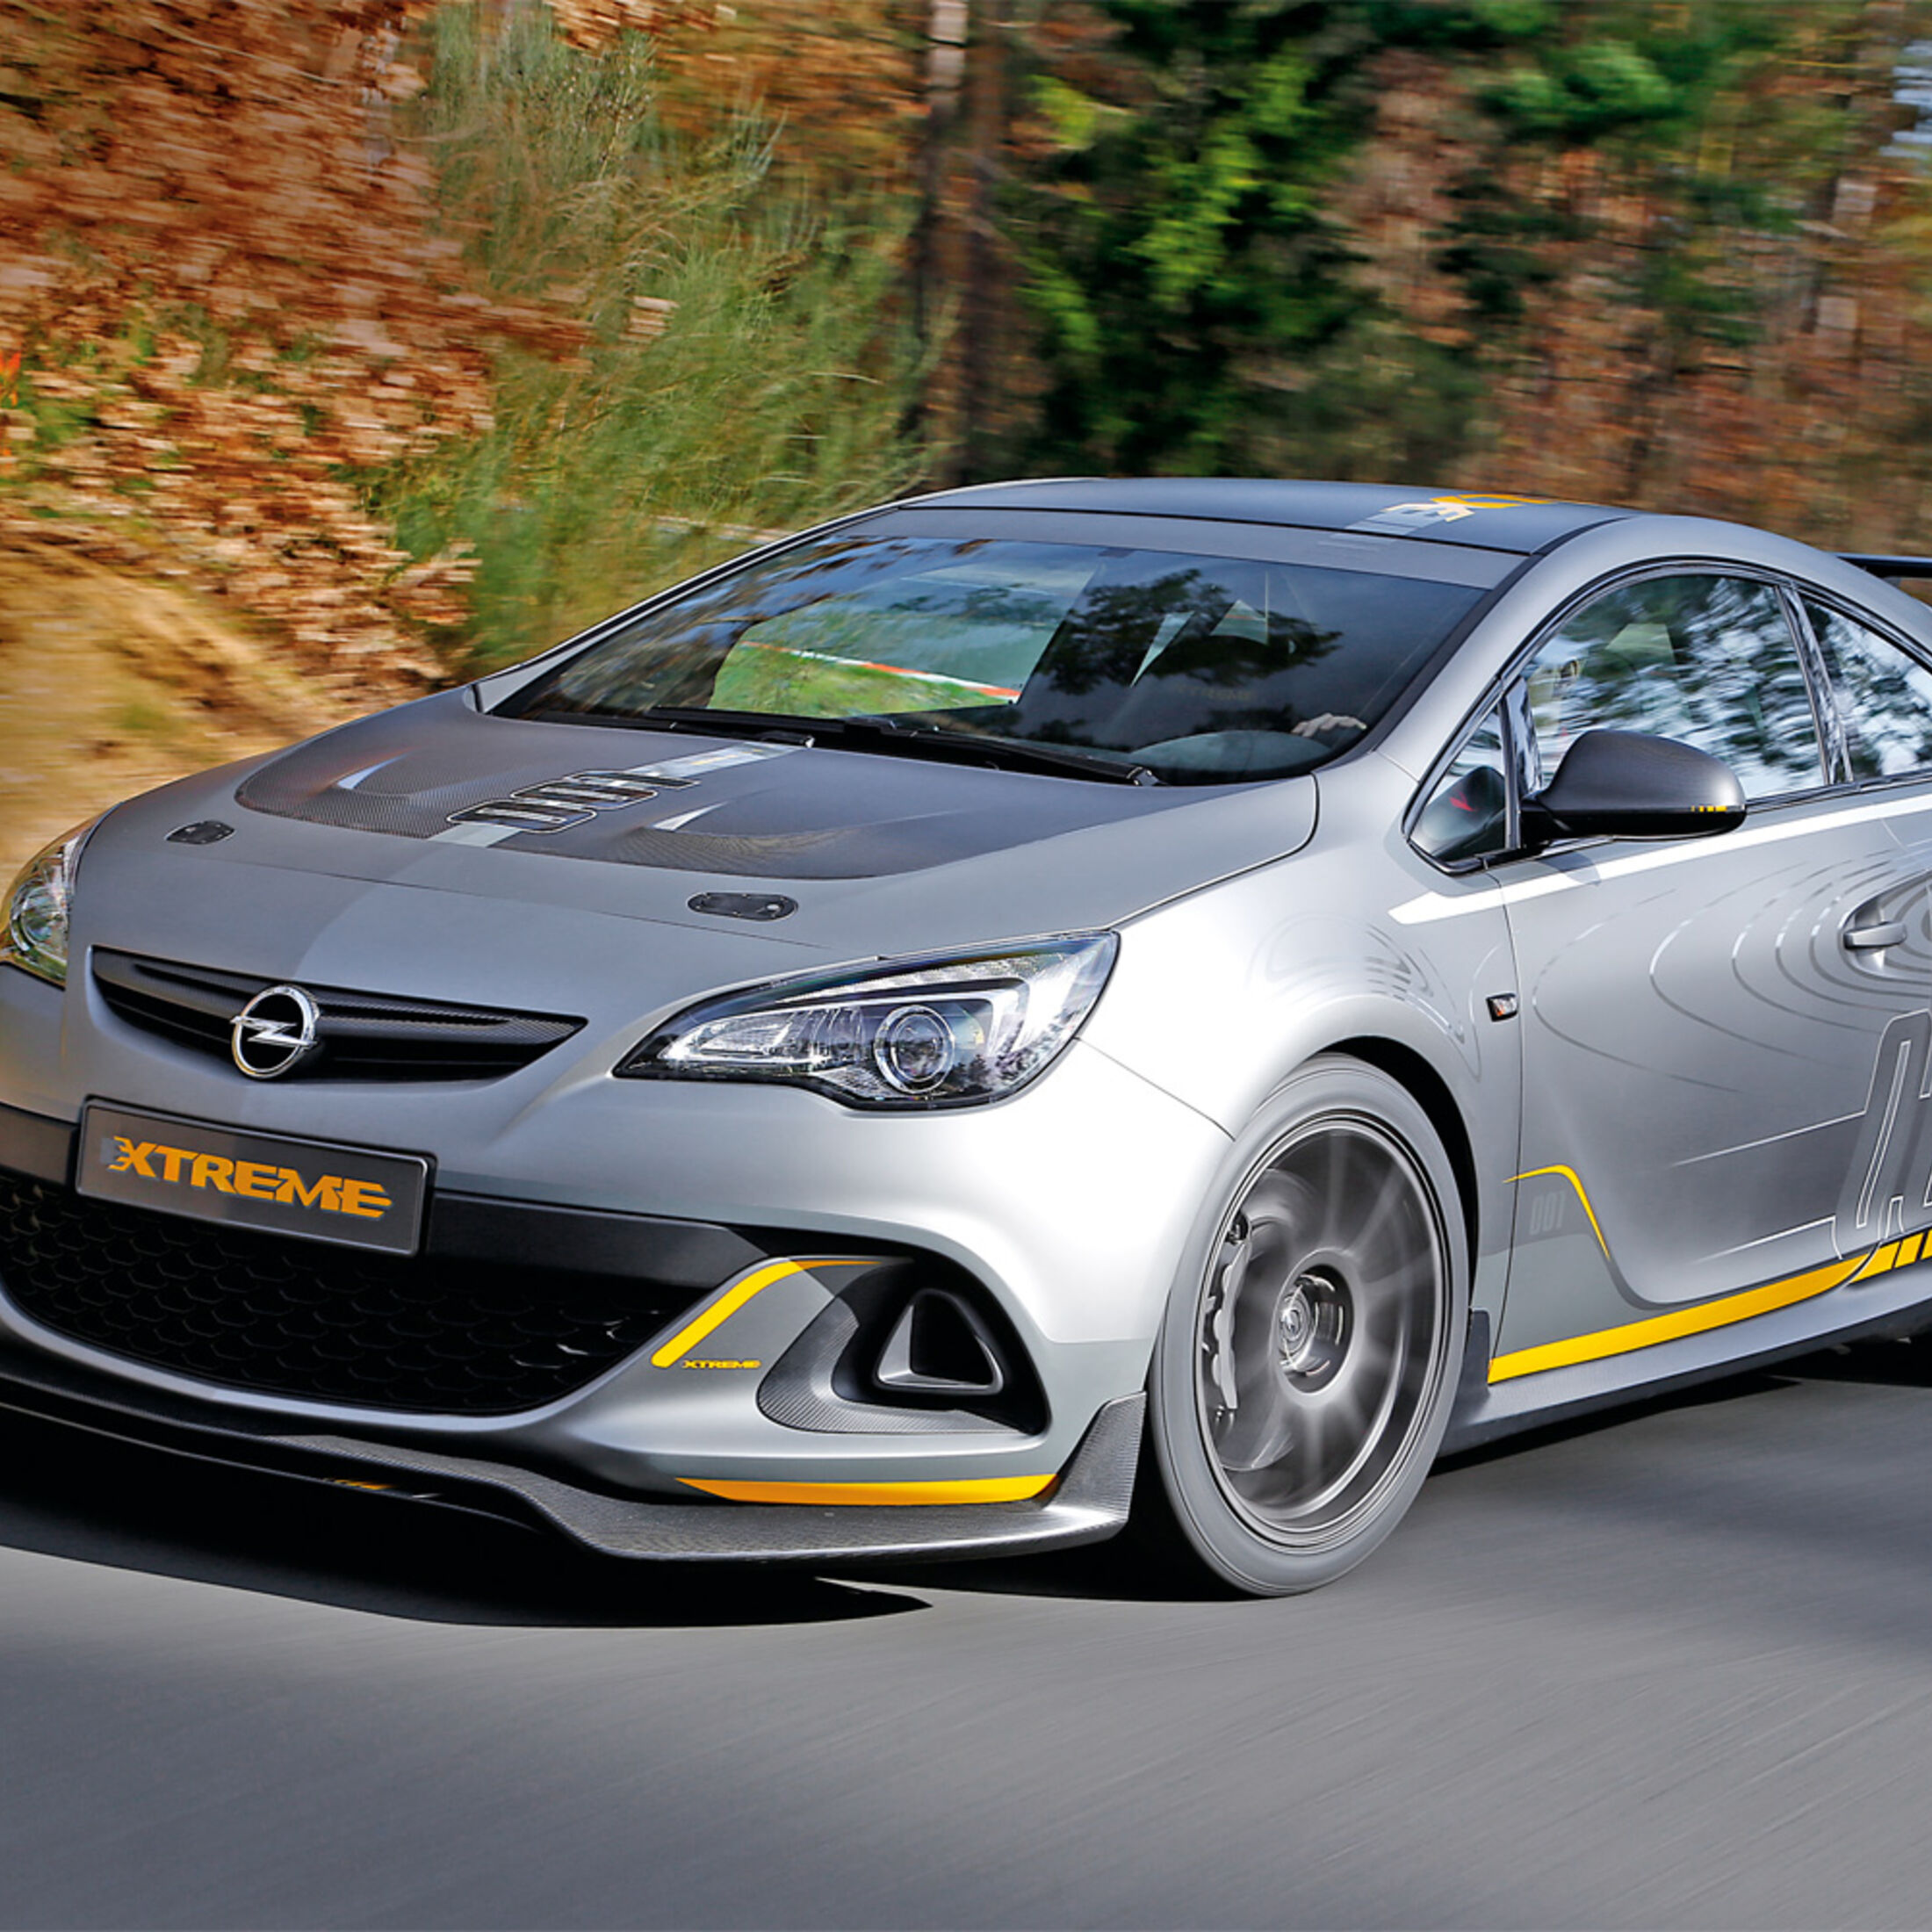 Opel Astra OPC. Opel Astra extreme. Opel OPC extreme. Opel Astra j OPC extreme.